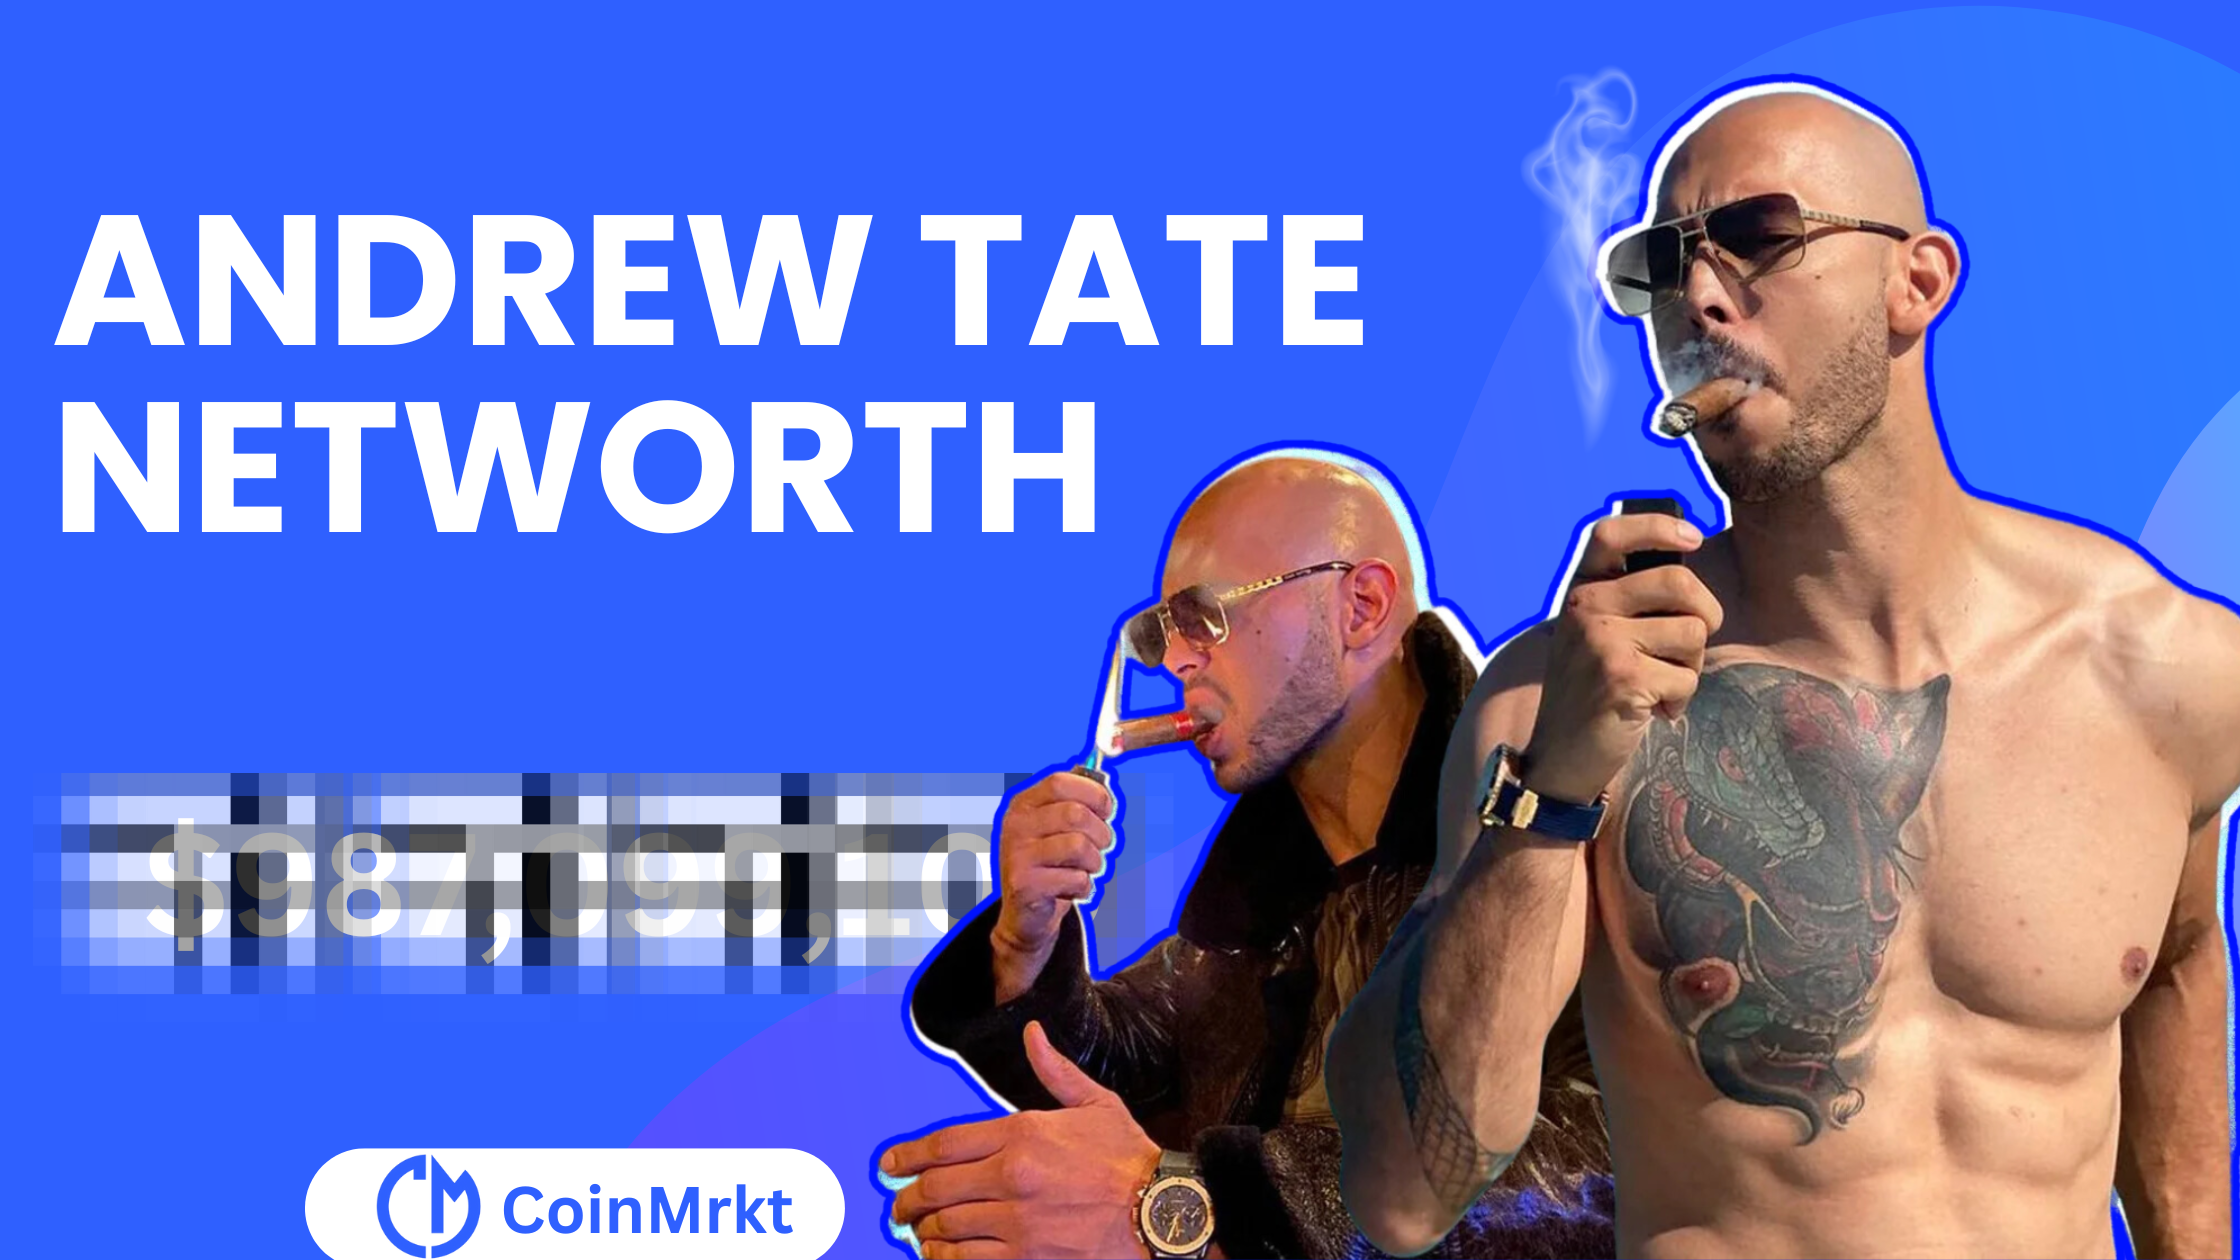 andrew tate networth